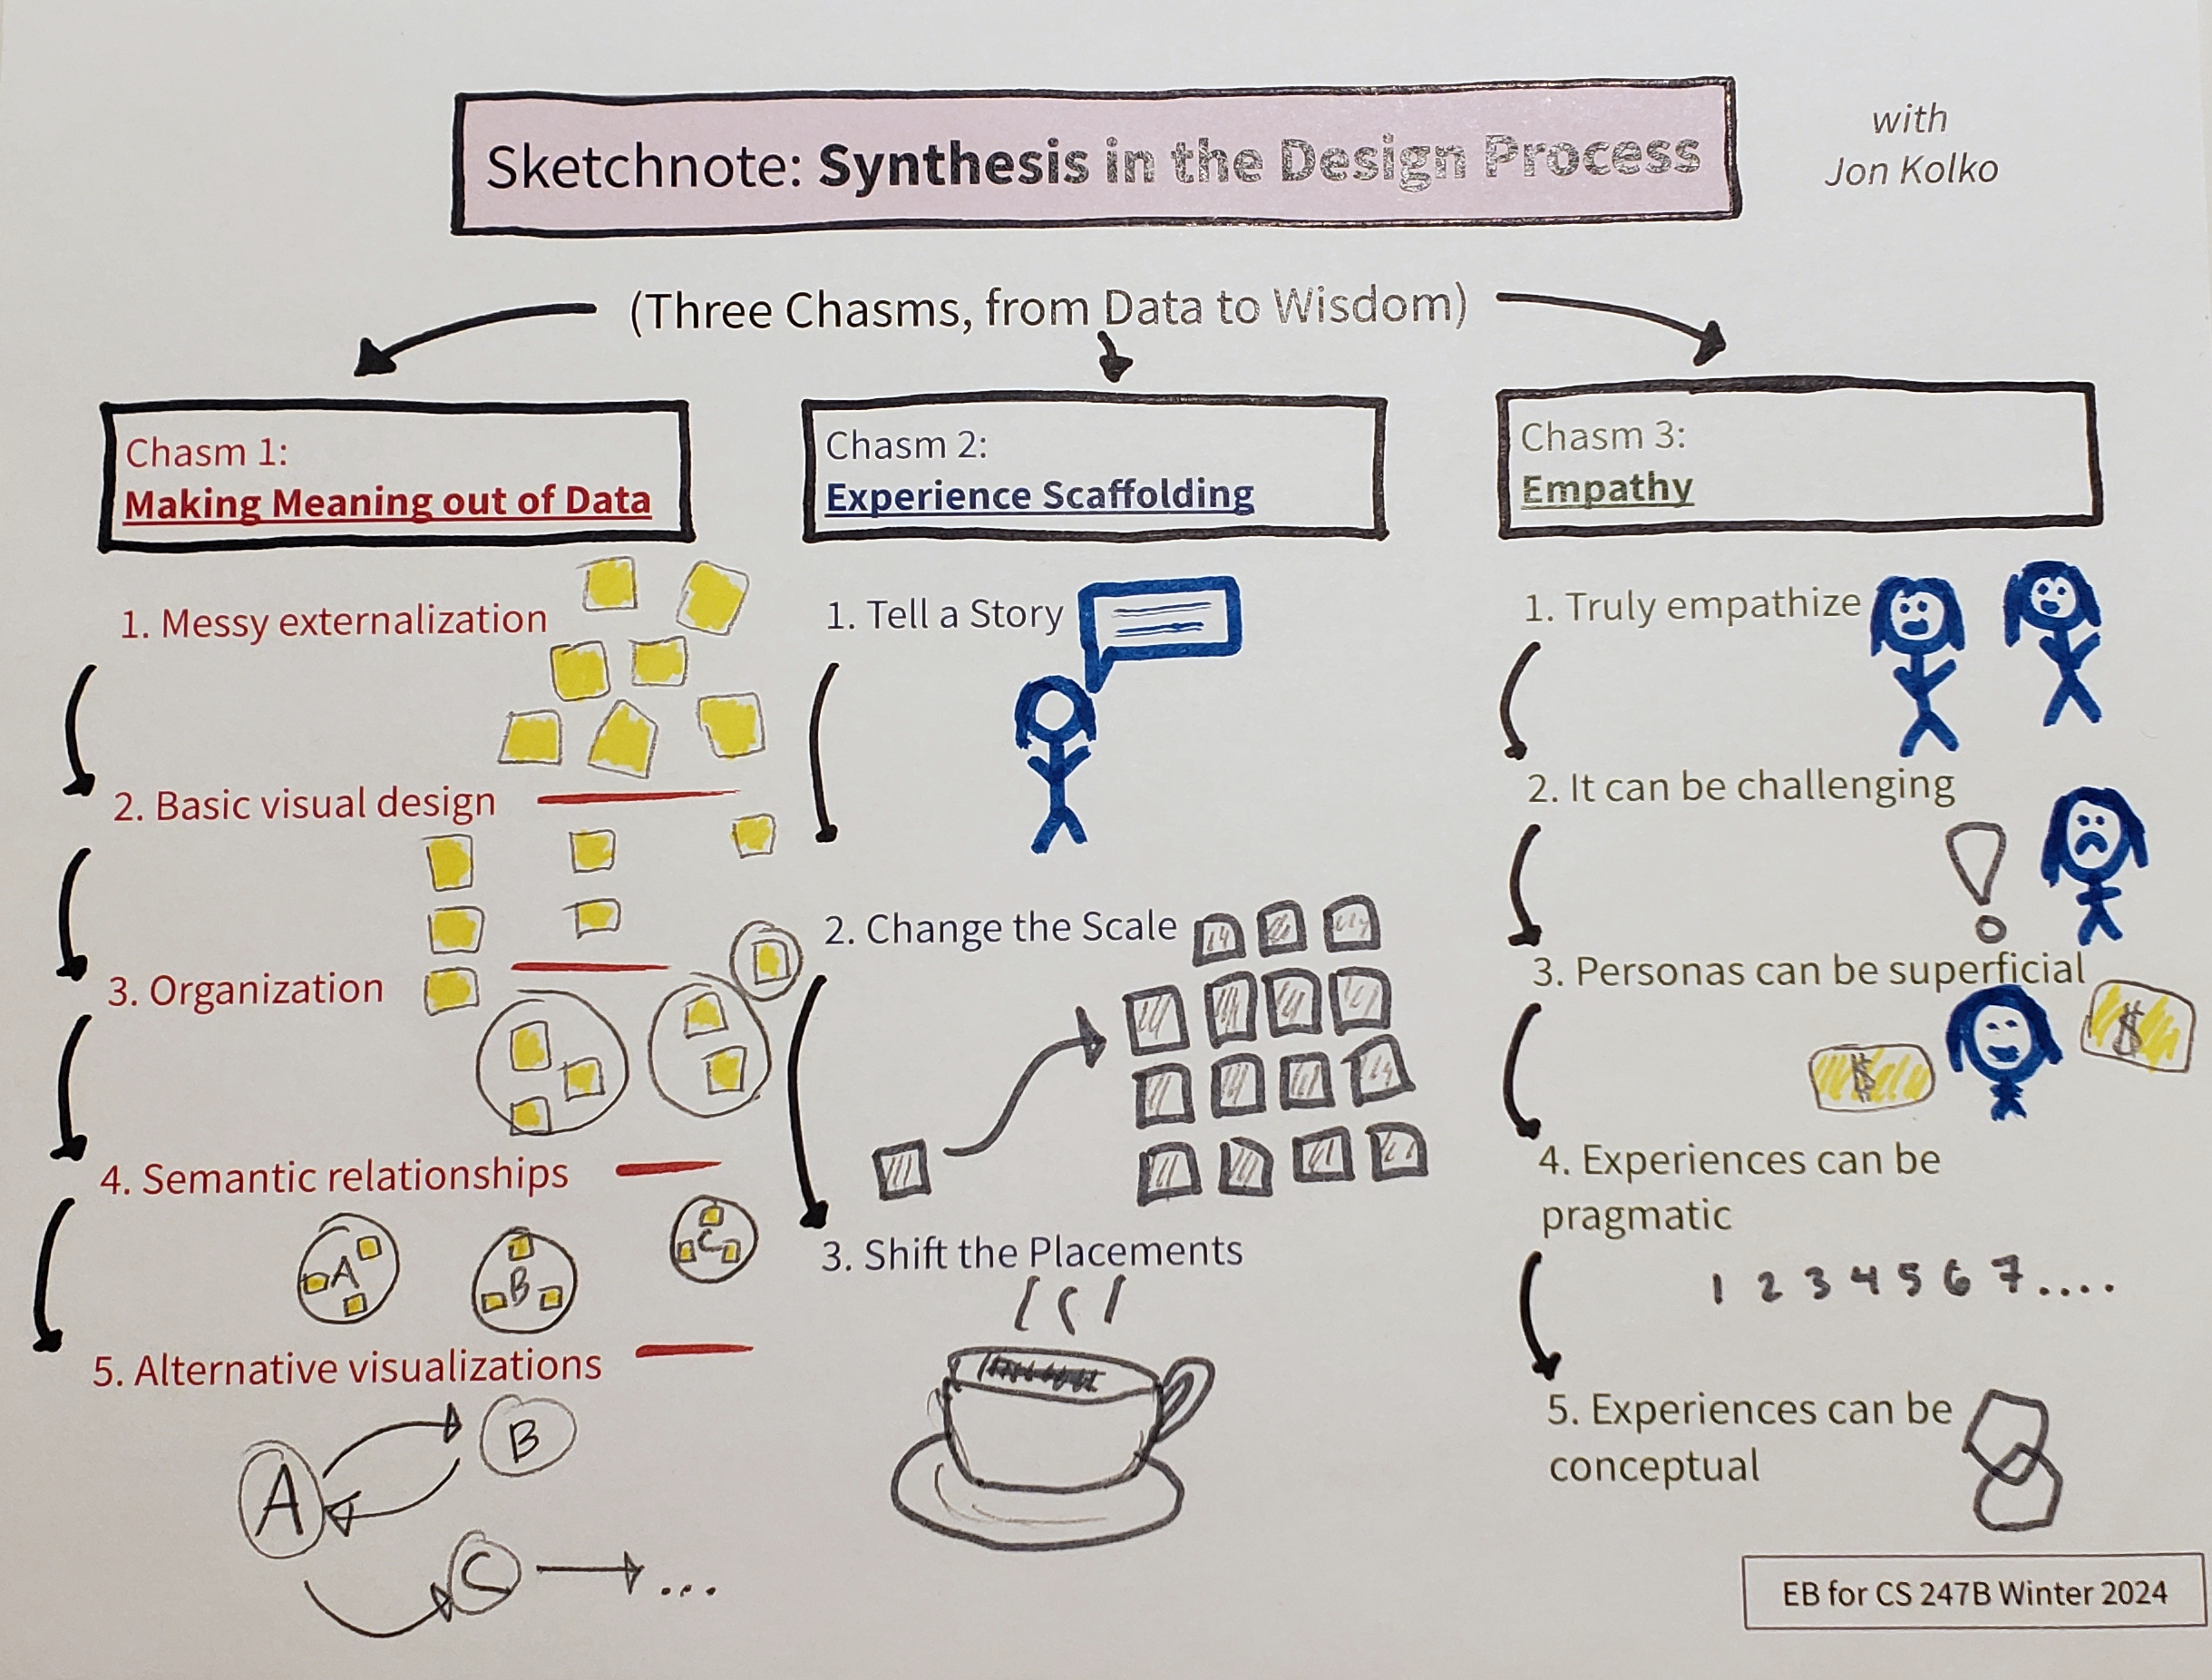 EB's sketchnote for synthesis on the design process. It shows the three chasms (making meaning out of data, experience scaffolding, and empathy). The first chasm has diagrams that show going from messy post-it notes to meaningful diagrams. The second chasm has someone telling a story, a visual depiction of scale, and a coffee cup (to represent the shifting placements example in the reading). The third chasm has people empathizing with each other, along with some of the challenges of empathizing and the types of experiences.